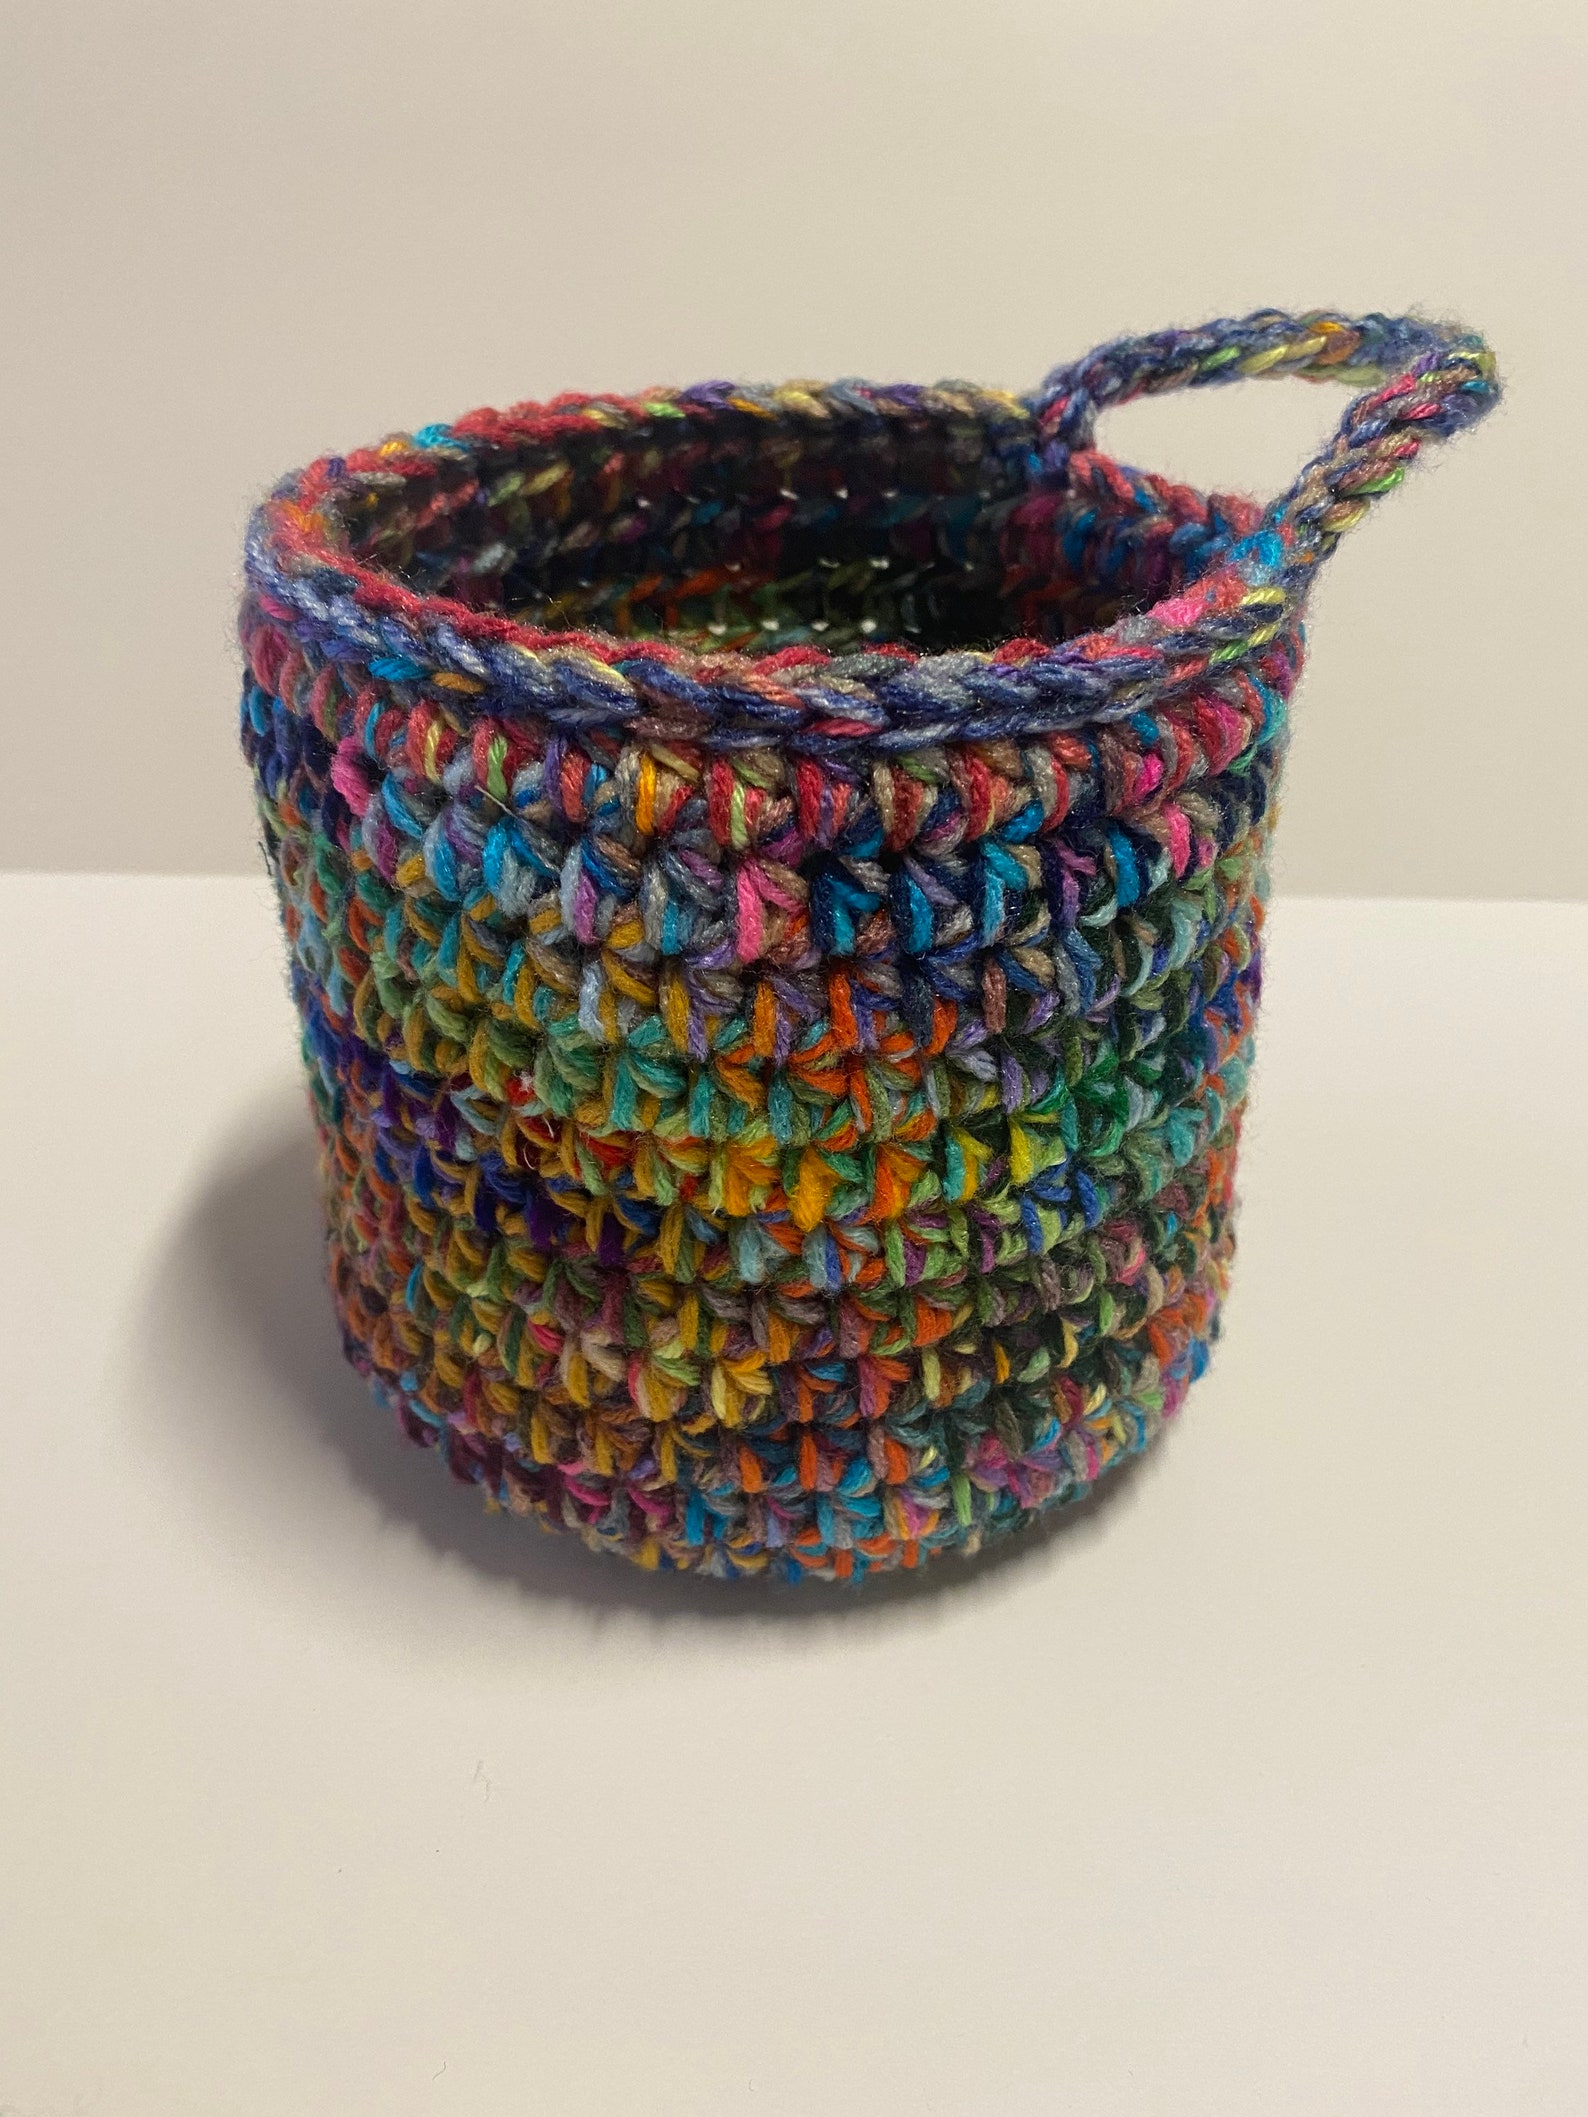 The Collapsible Crochet Basket PATTERN 8 available for Free - Etsy